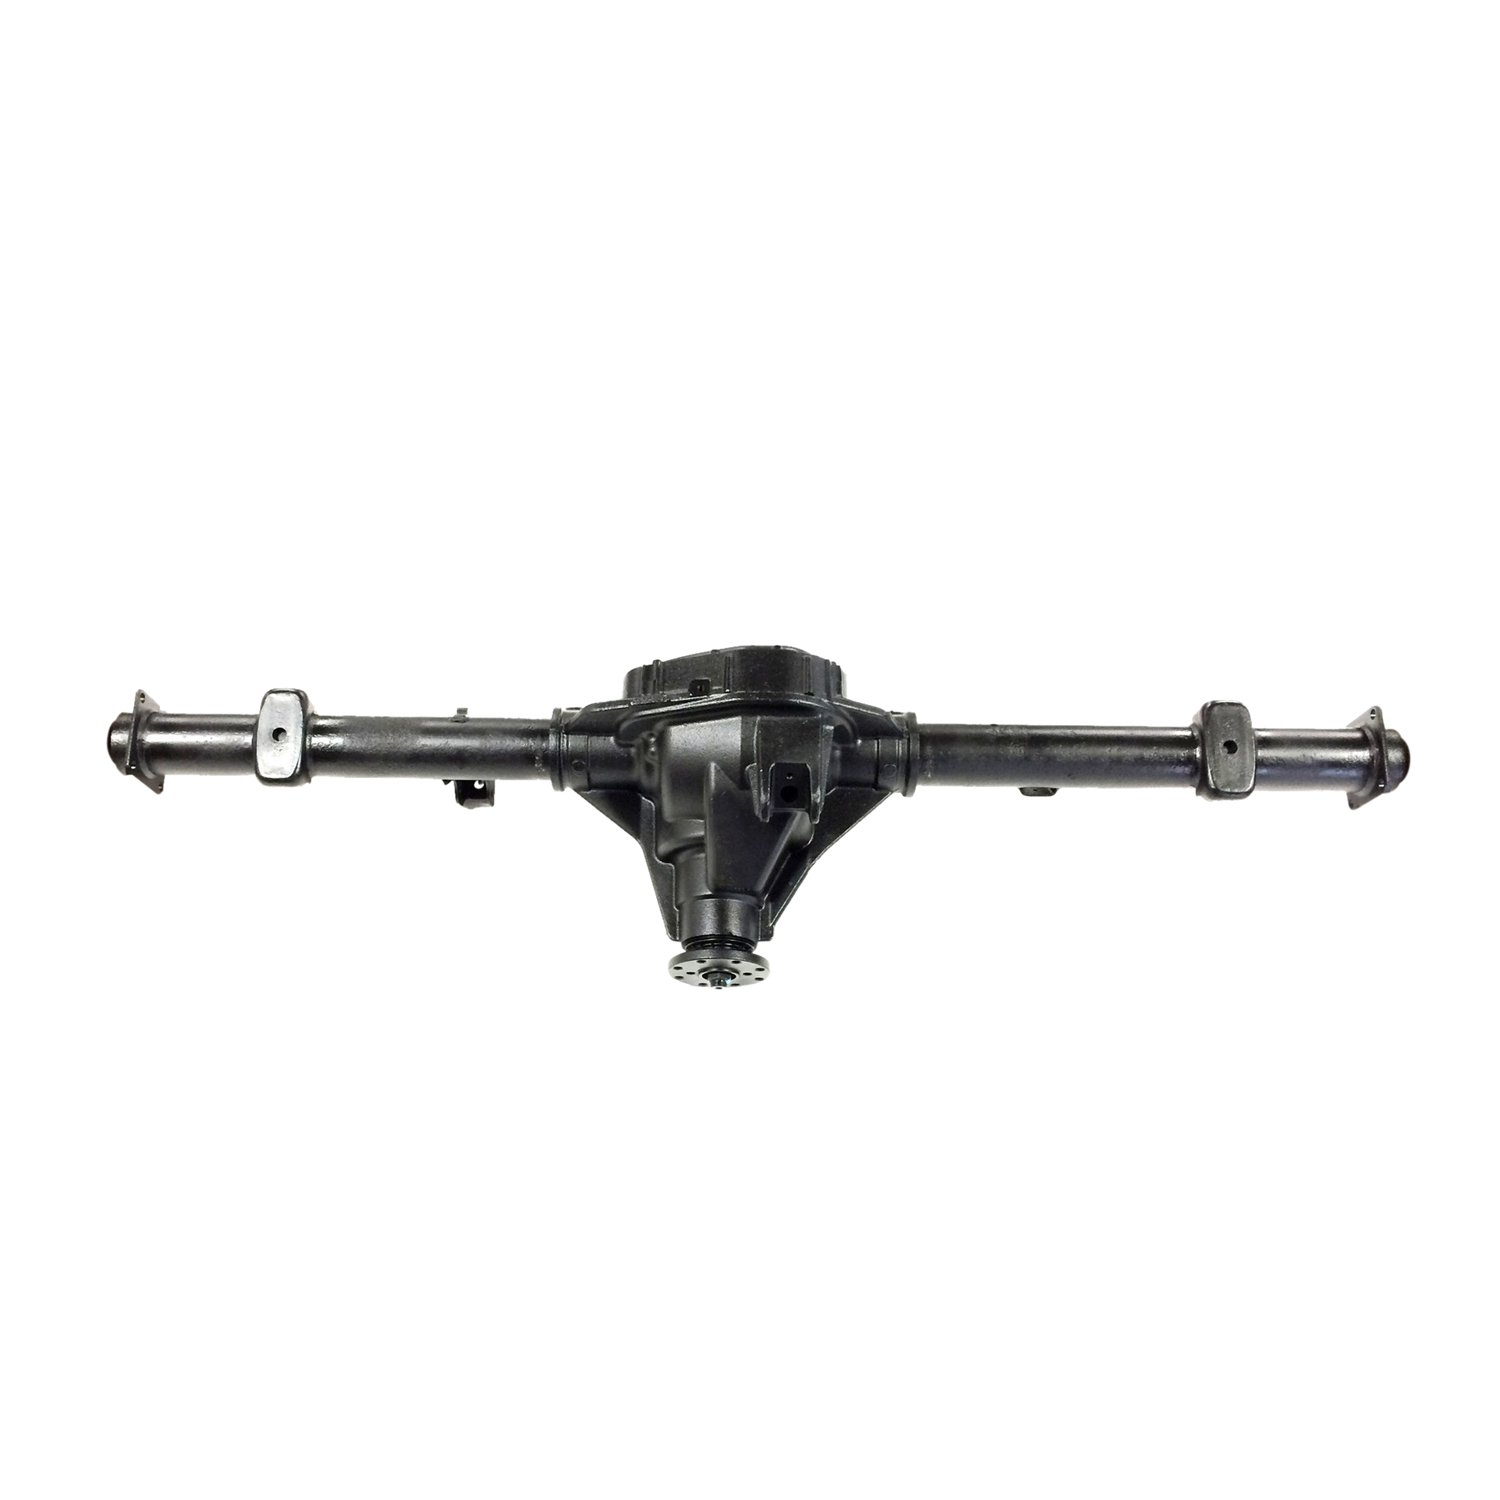 Remanufactured Axle 9.75" 2000 F150 3.73 , Rear Drum, Stepped Housing, Posi *Check Tag*